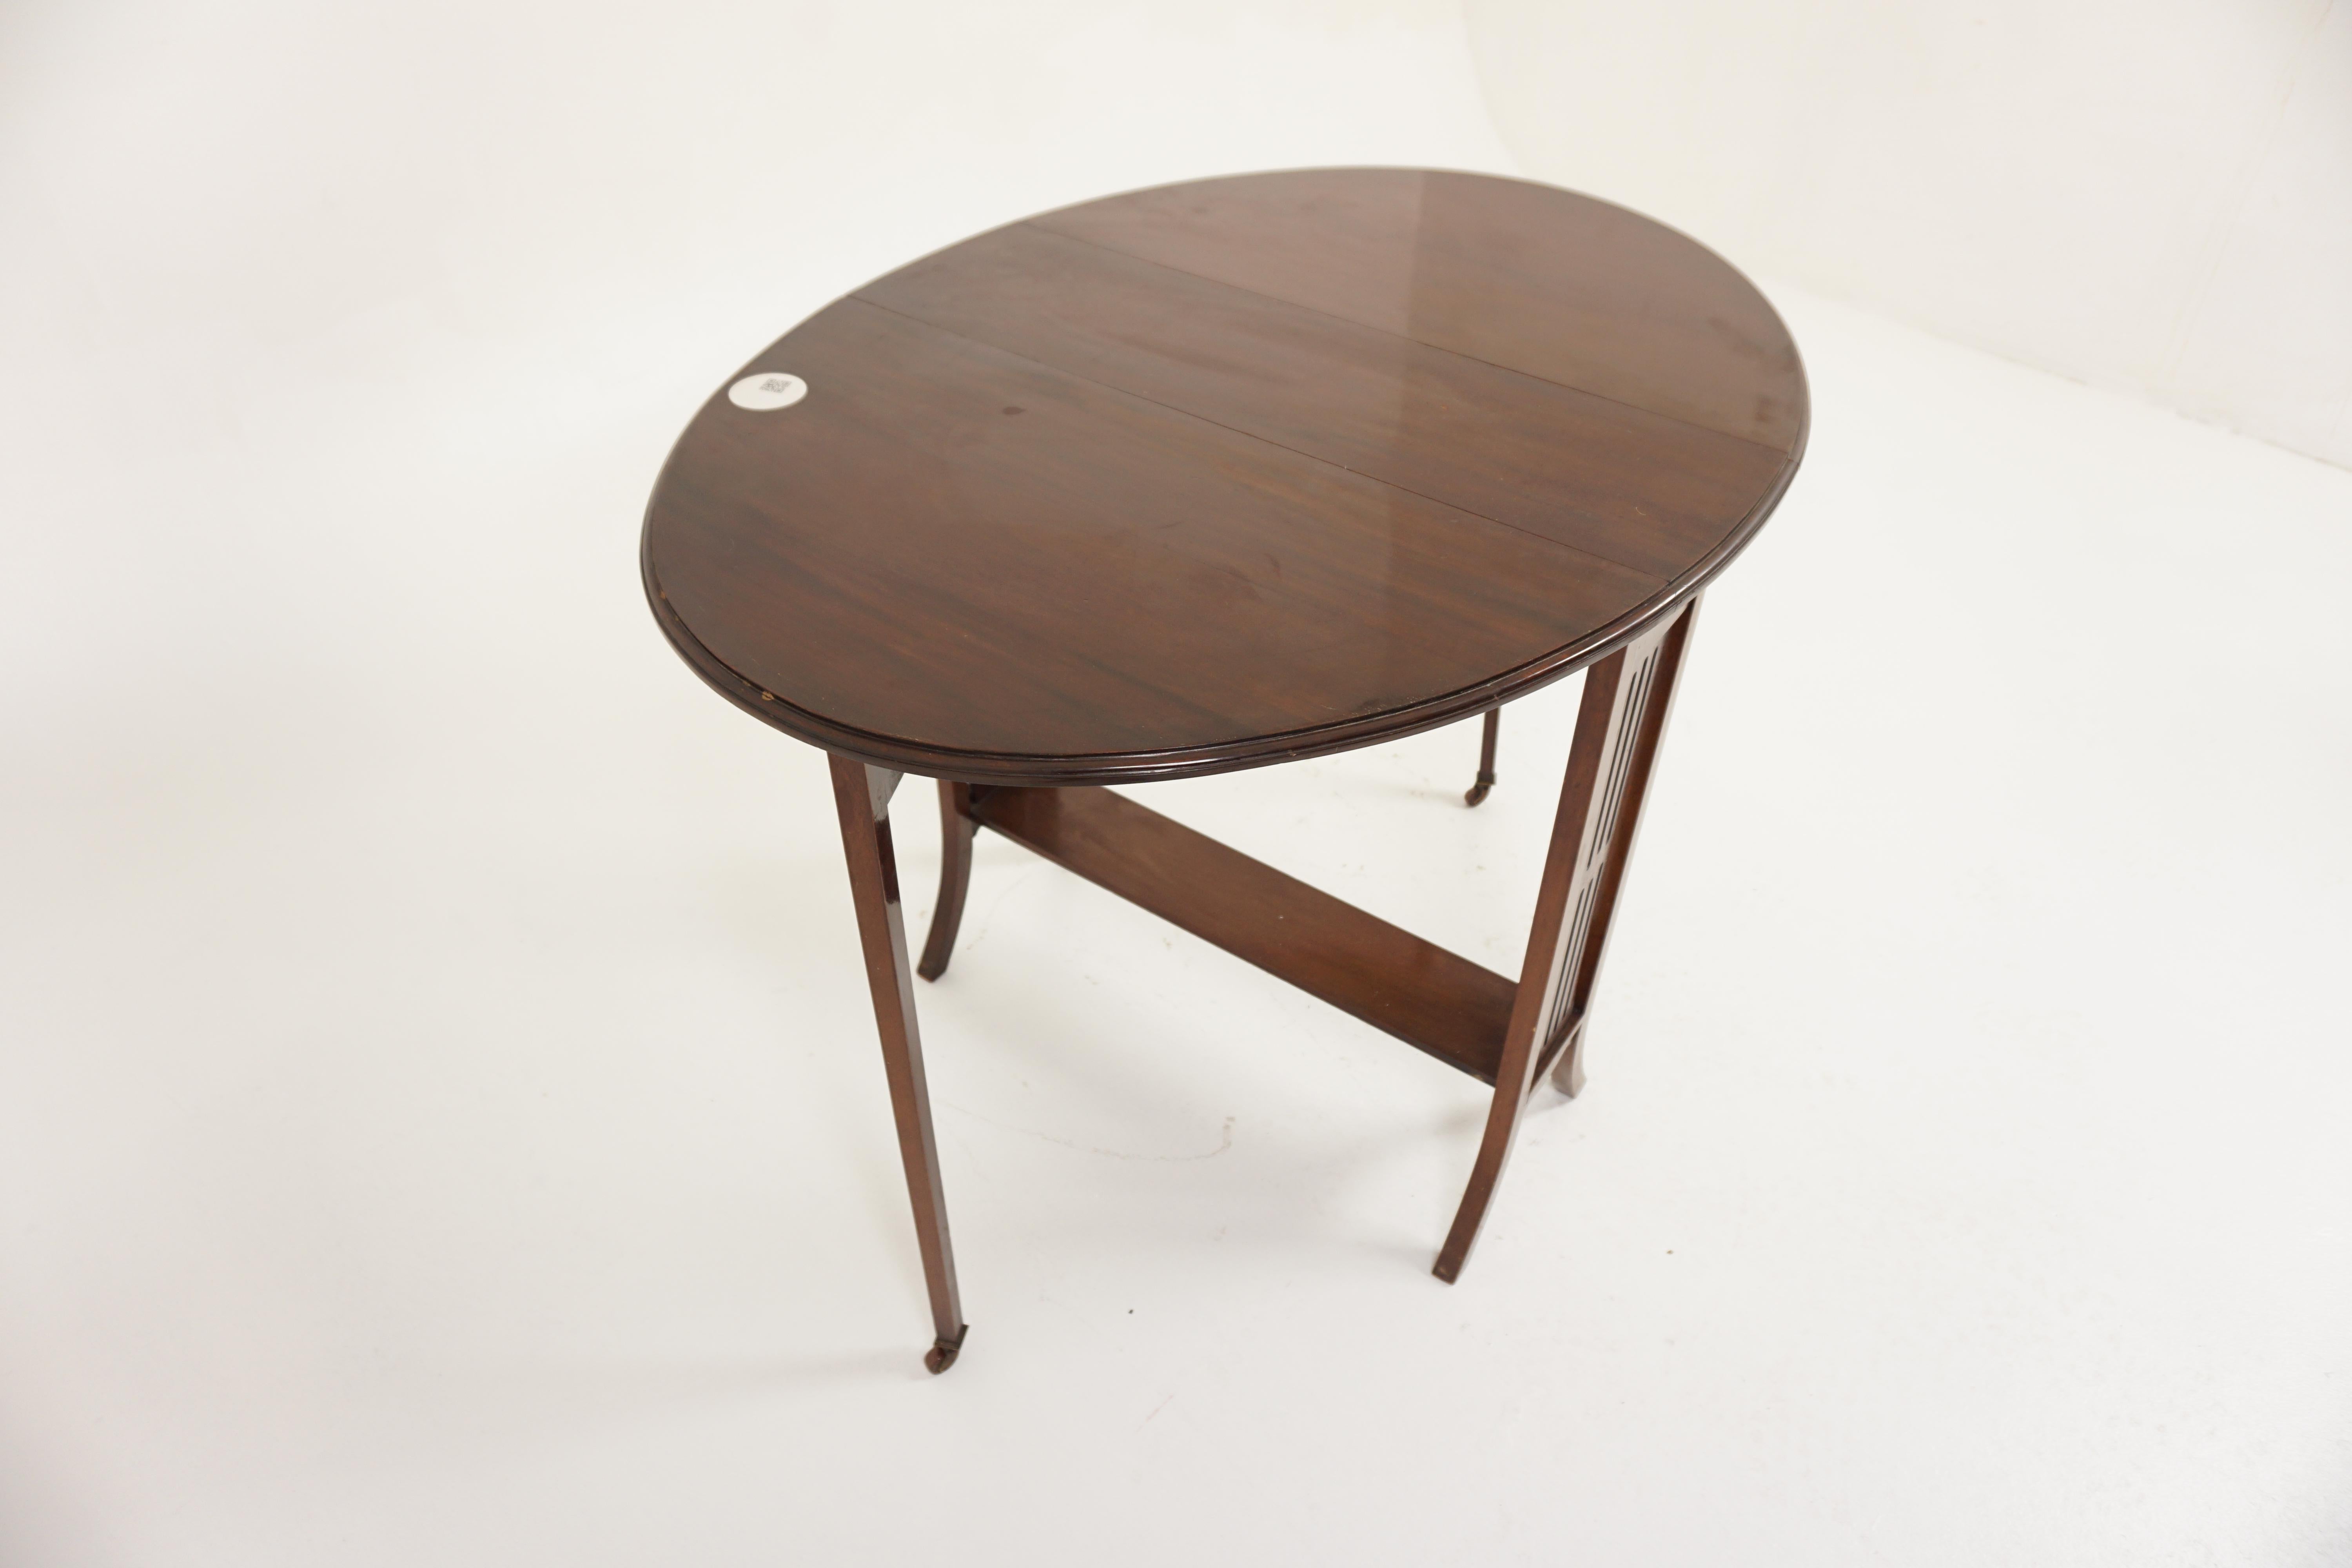 Hand-Crafted Antique Walnut Table, Oval Sutherland Drop Leaf Side Table, Scotland 1910, H1138